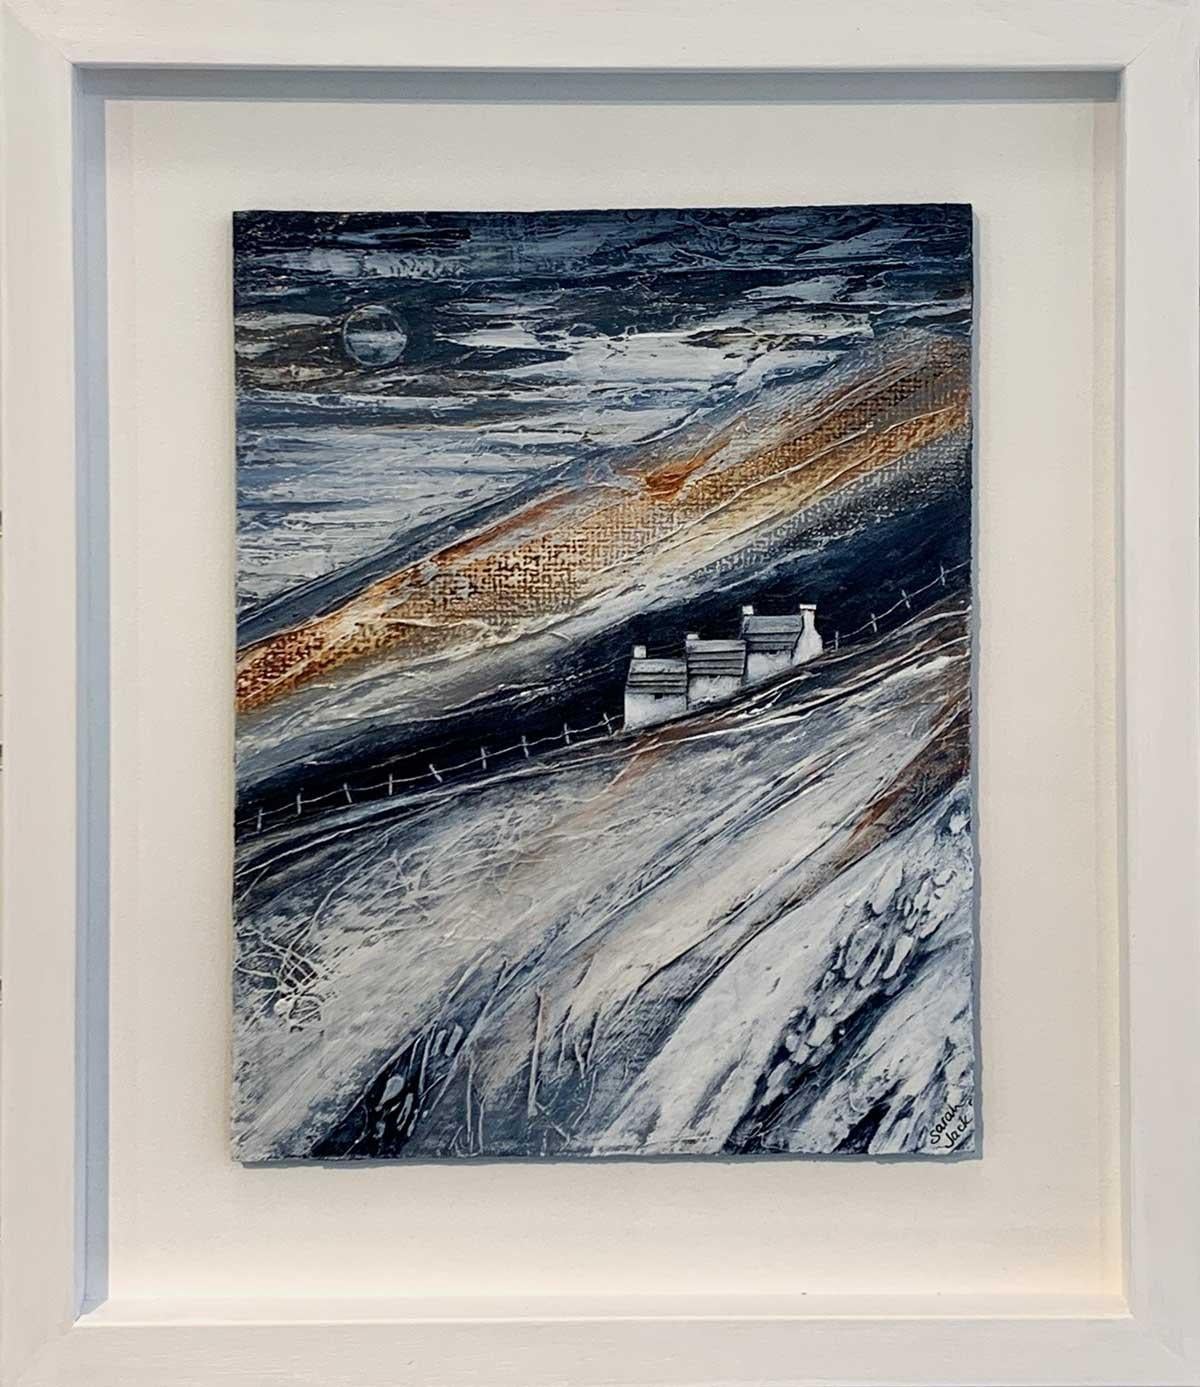 Company on the Hillside - Contemporary Rural Landscape: Framed Mixed Media - Gray Landscape Painting by Sarah Jack